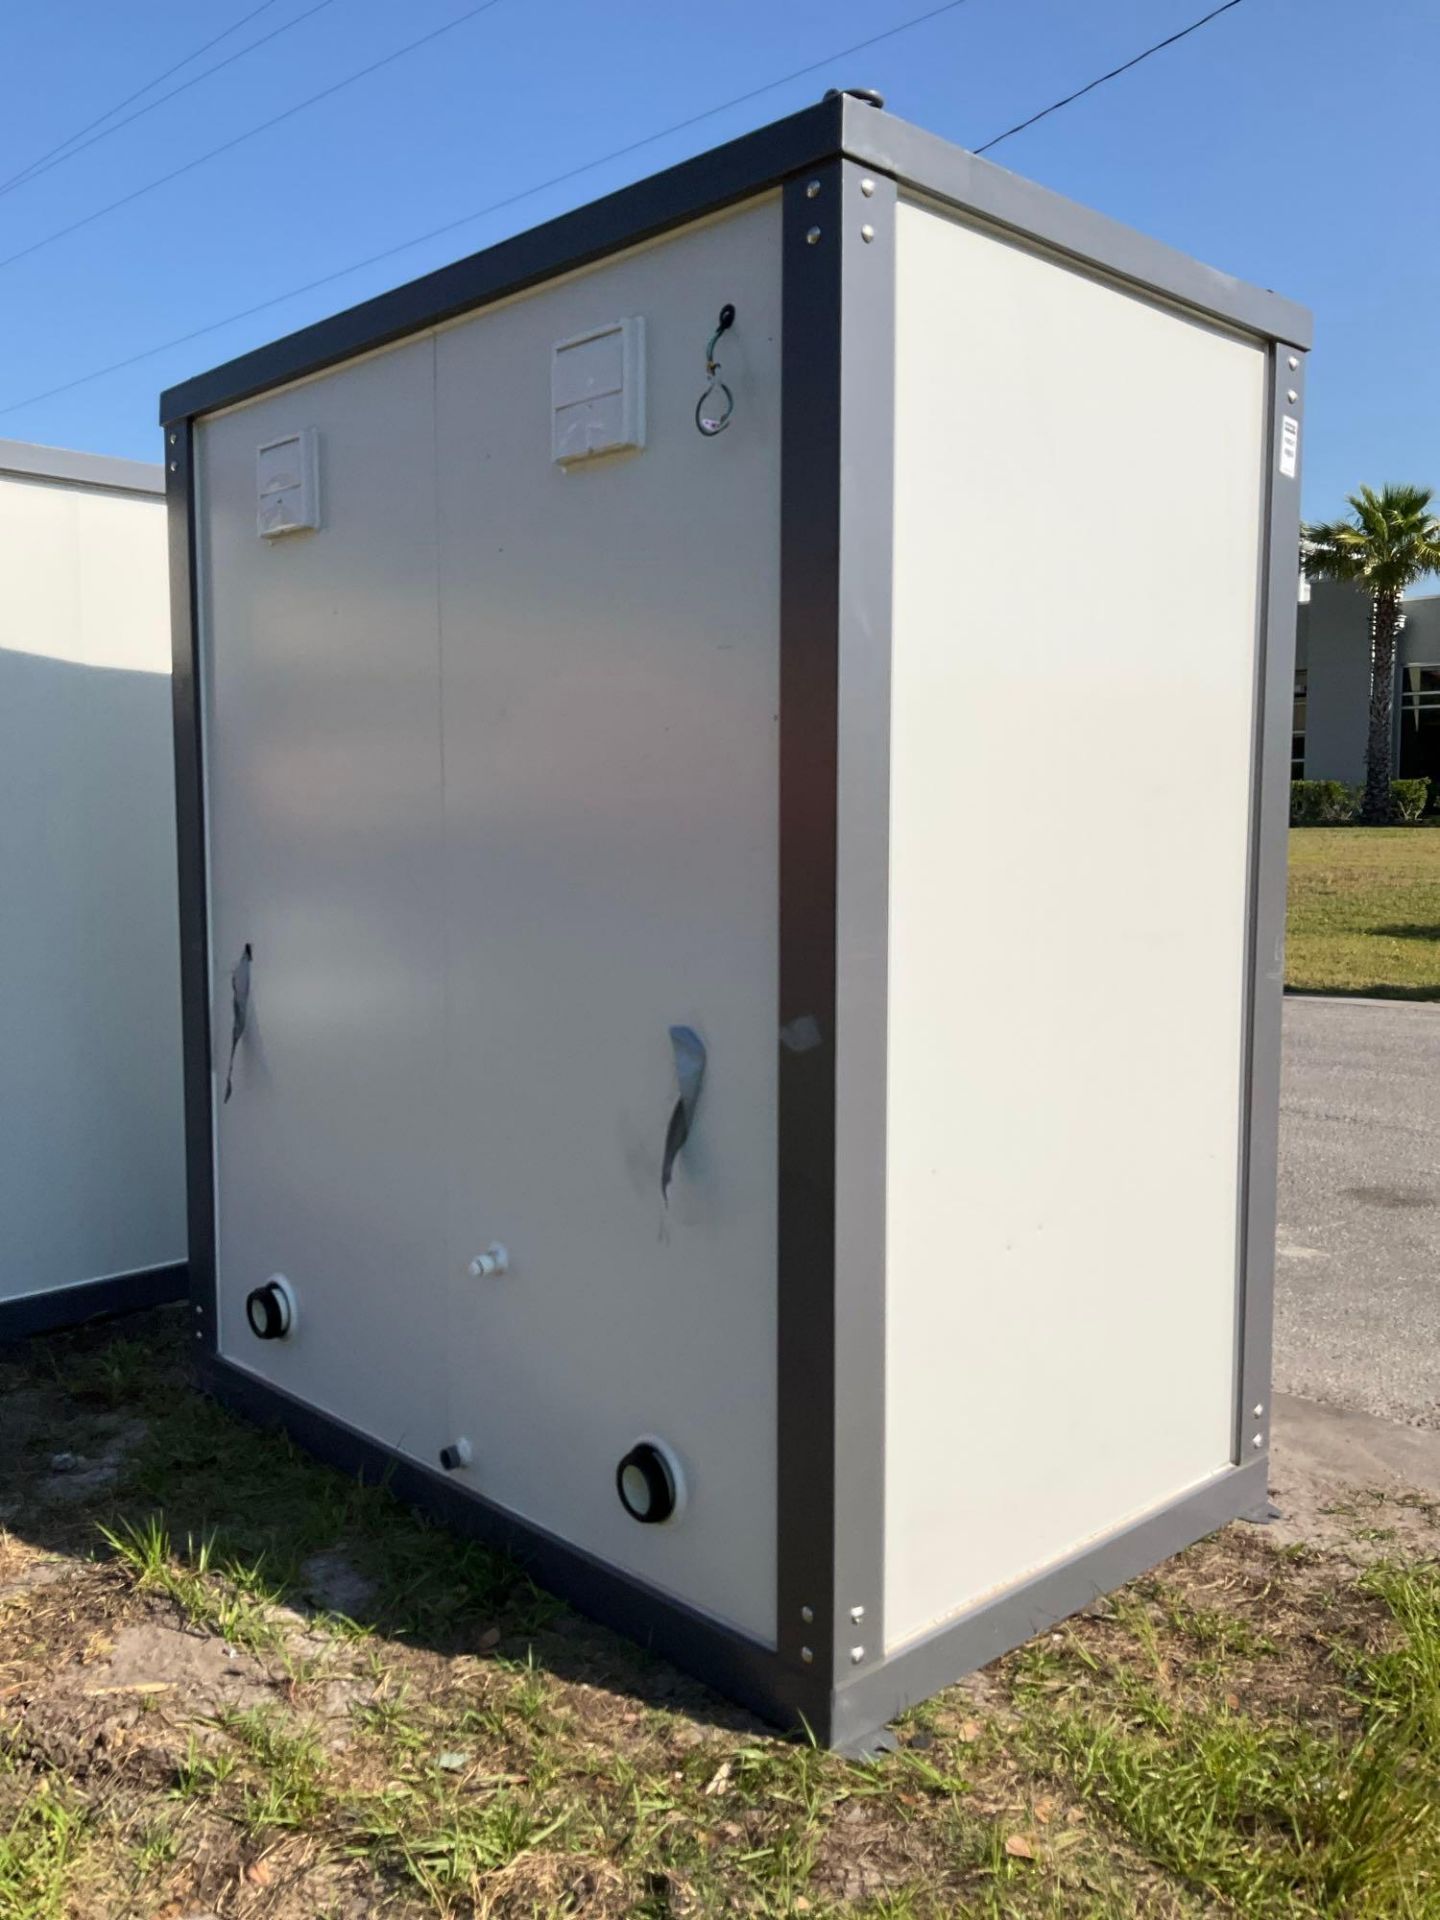 UNUSED PORTABLE DOUBLE BATHROOM UNIT, 2 STALLS, ELECTRIC & PLUMBING HOOK UP WITH EXTERIOR PLUMBING - Image 2 of 12